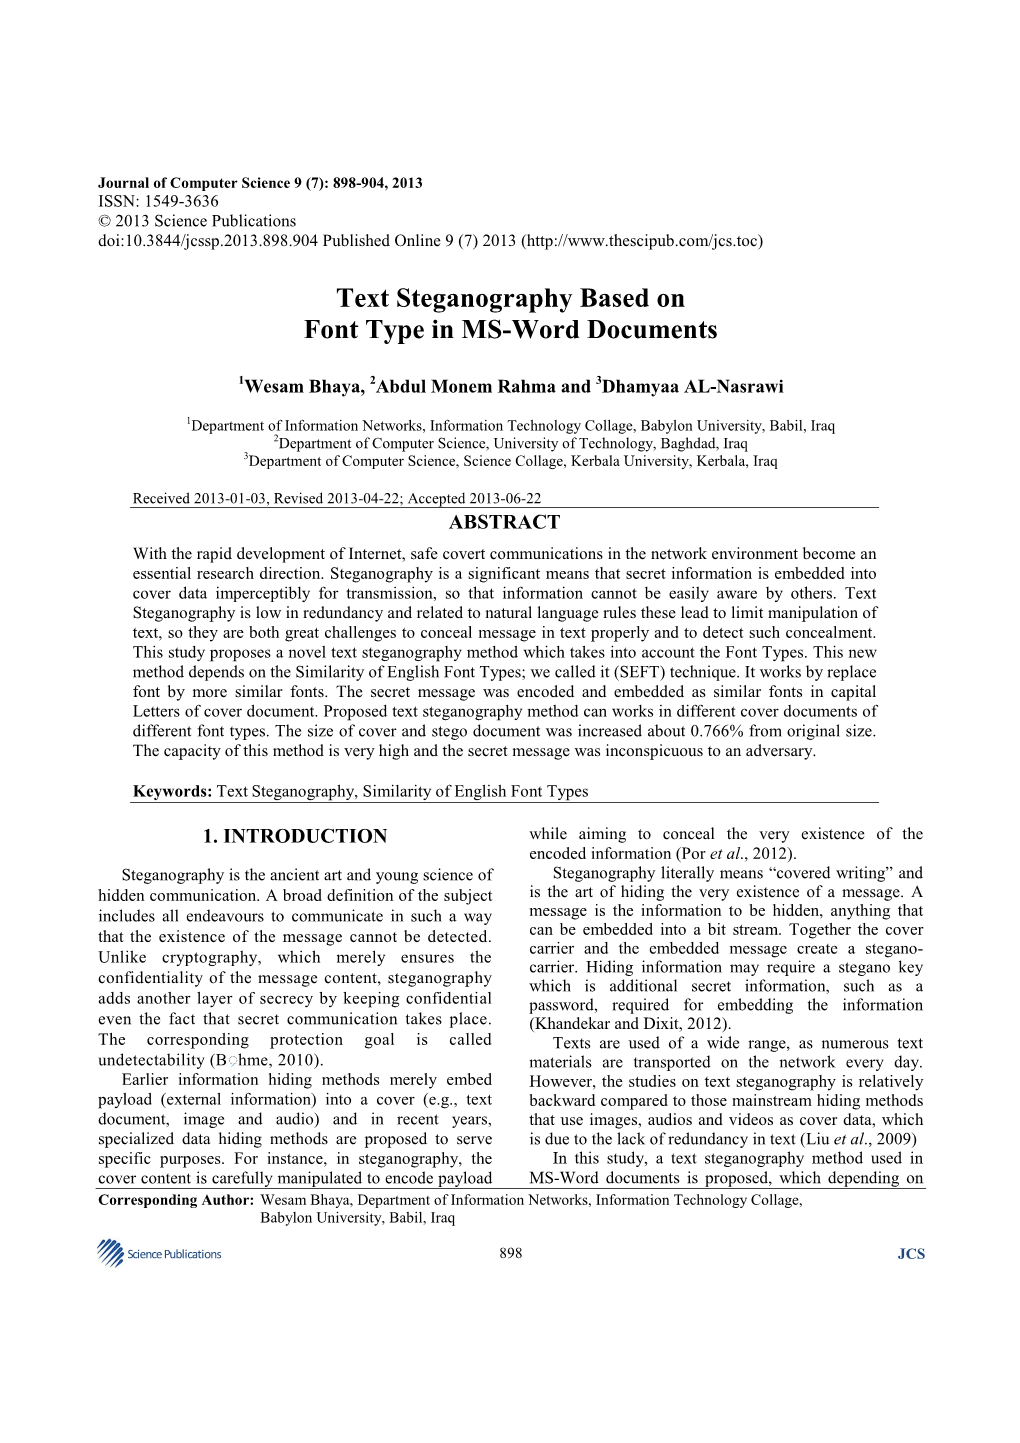 Text Steganography Based on Font Type in MS-Word Documents